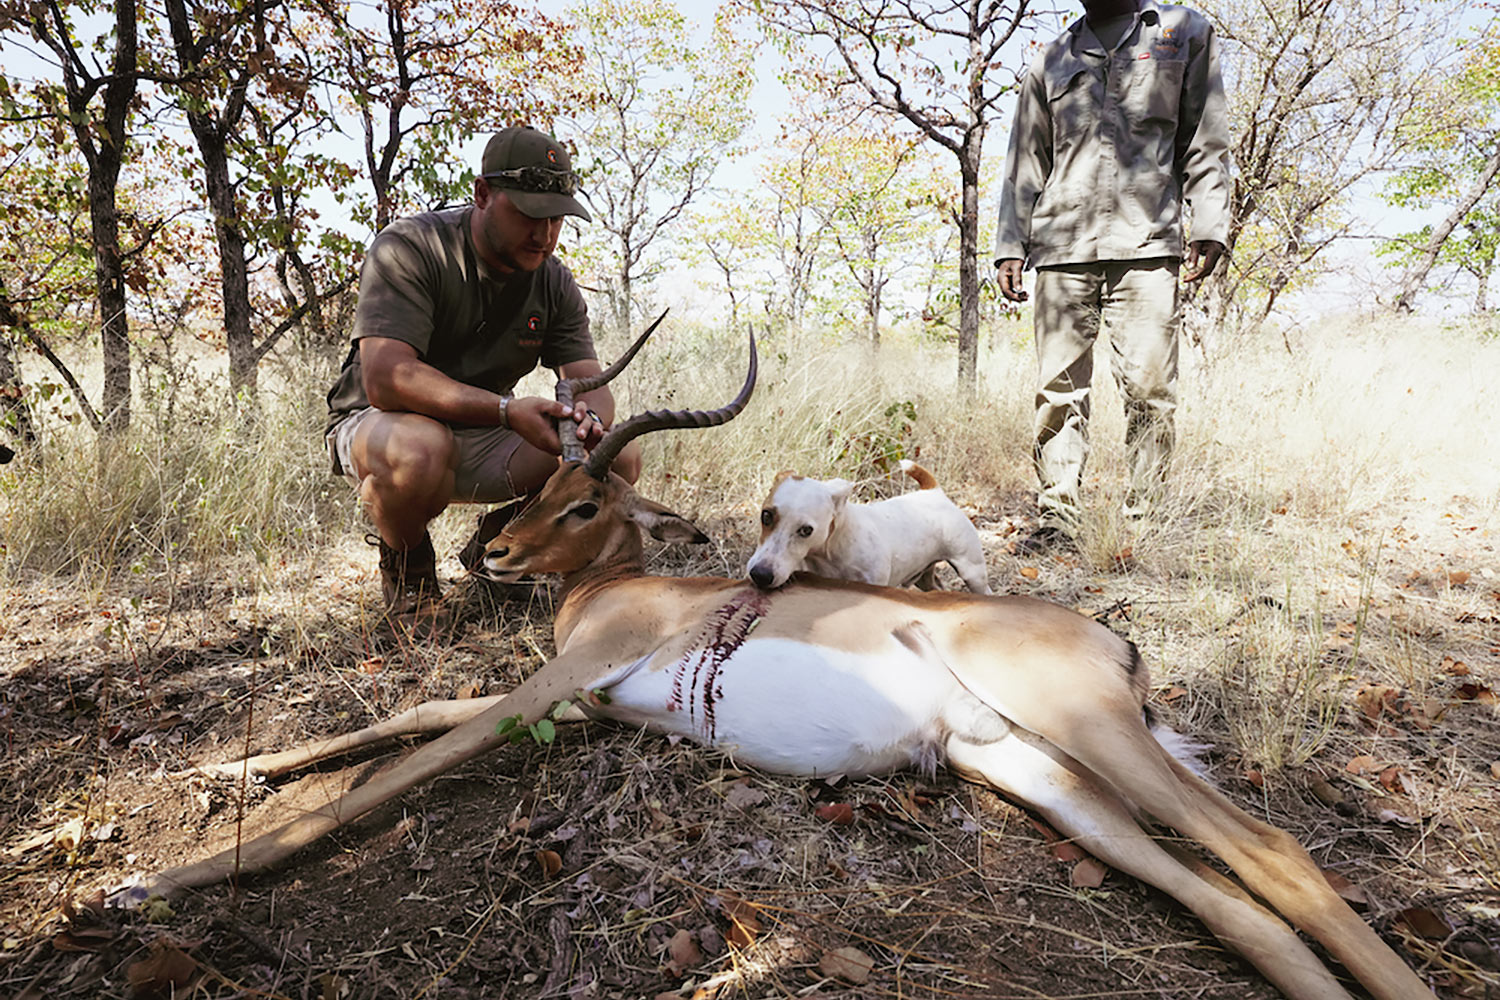 smooth-coated jack russell terrier licks blood from dead impala while hunter holds horn and another looks on